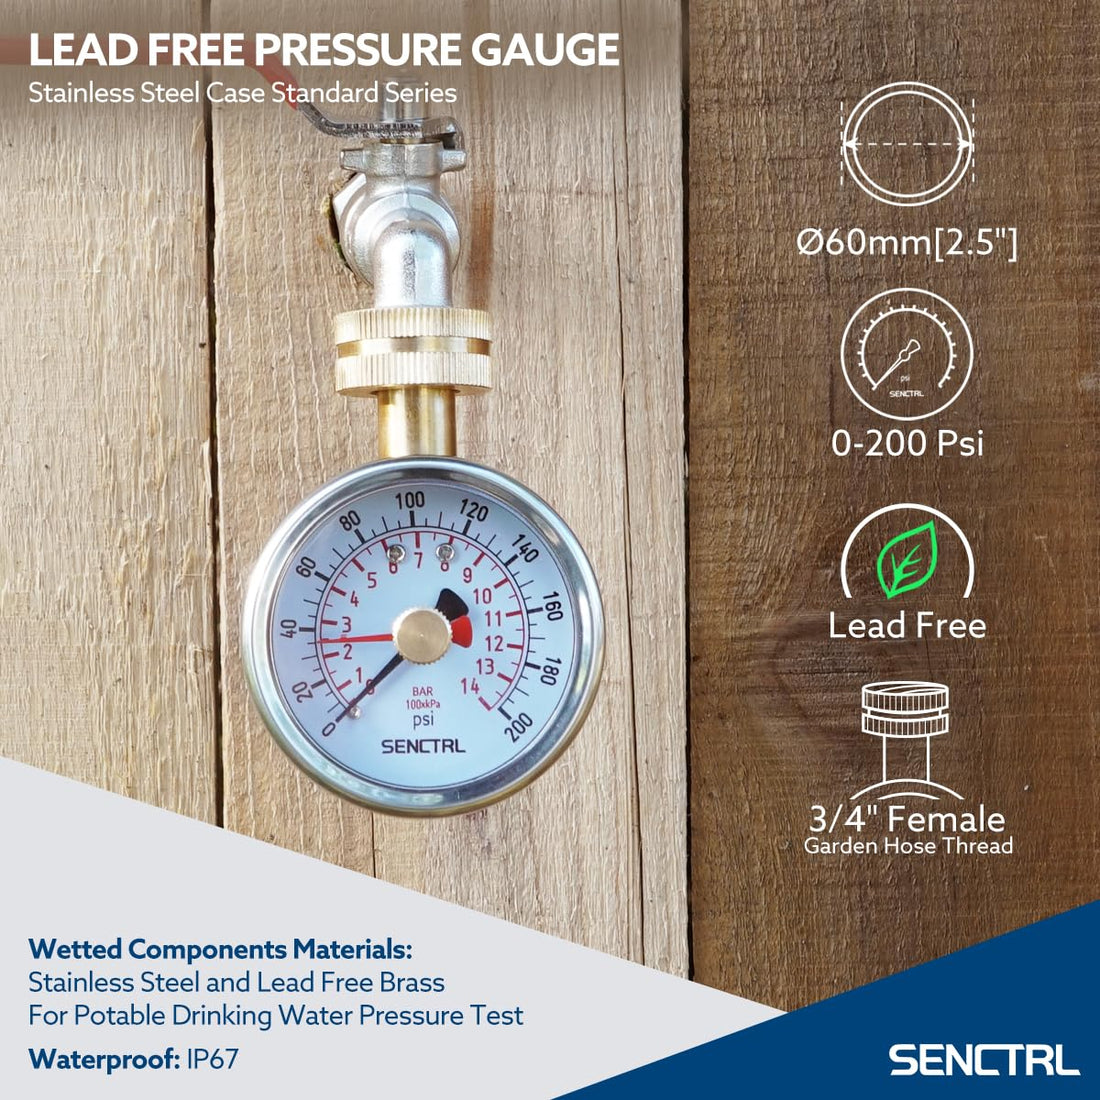 SENCTRL 0-200 Psi Water Pressure Gauge Test with Lazy Hand, Lead-Free, Anti-Fog, Waterproof, 2.5" Dial Size, 3/4" Female Garden Hose Thread, Stainless Steel Case, for Home Potable Water, House Tube